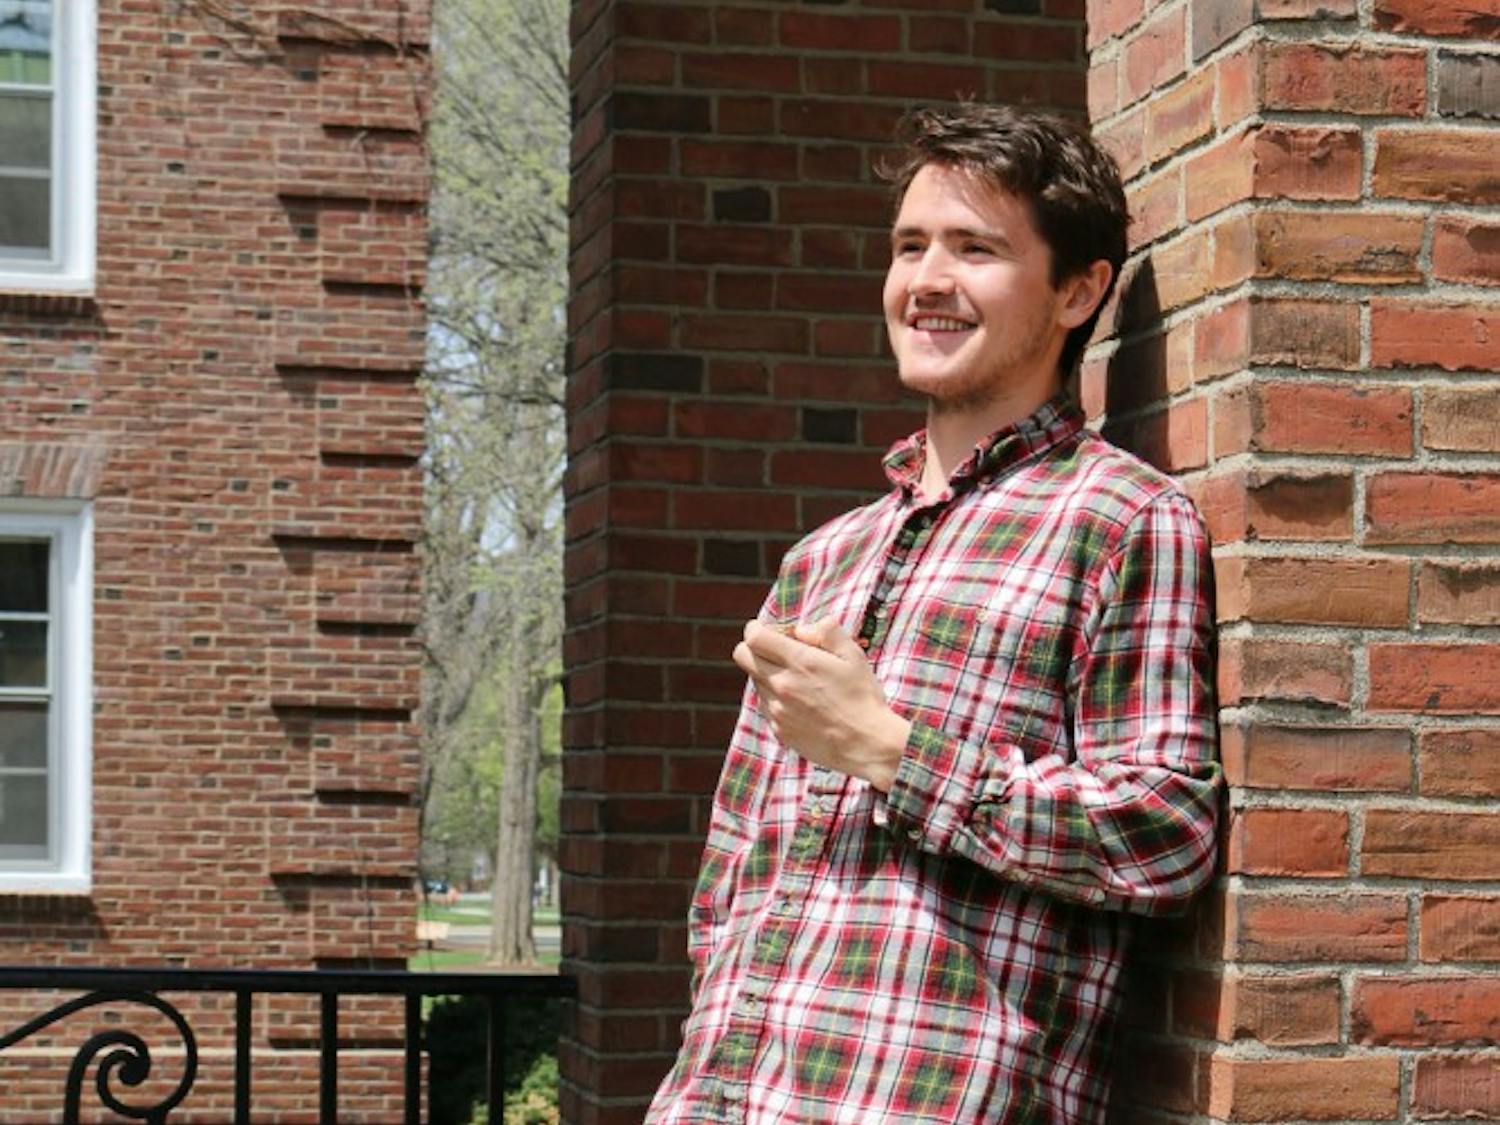 A woman Henry Russell '15 met during his freshmen year shaped his time at the College.